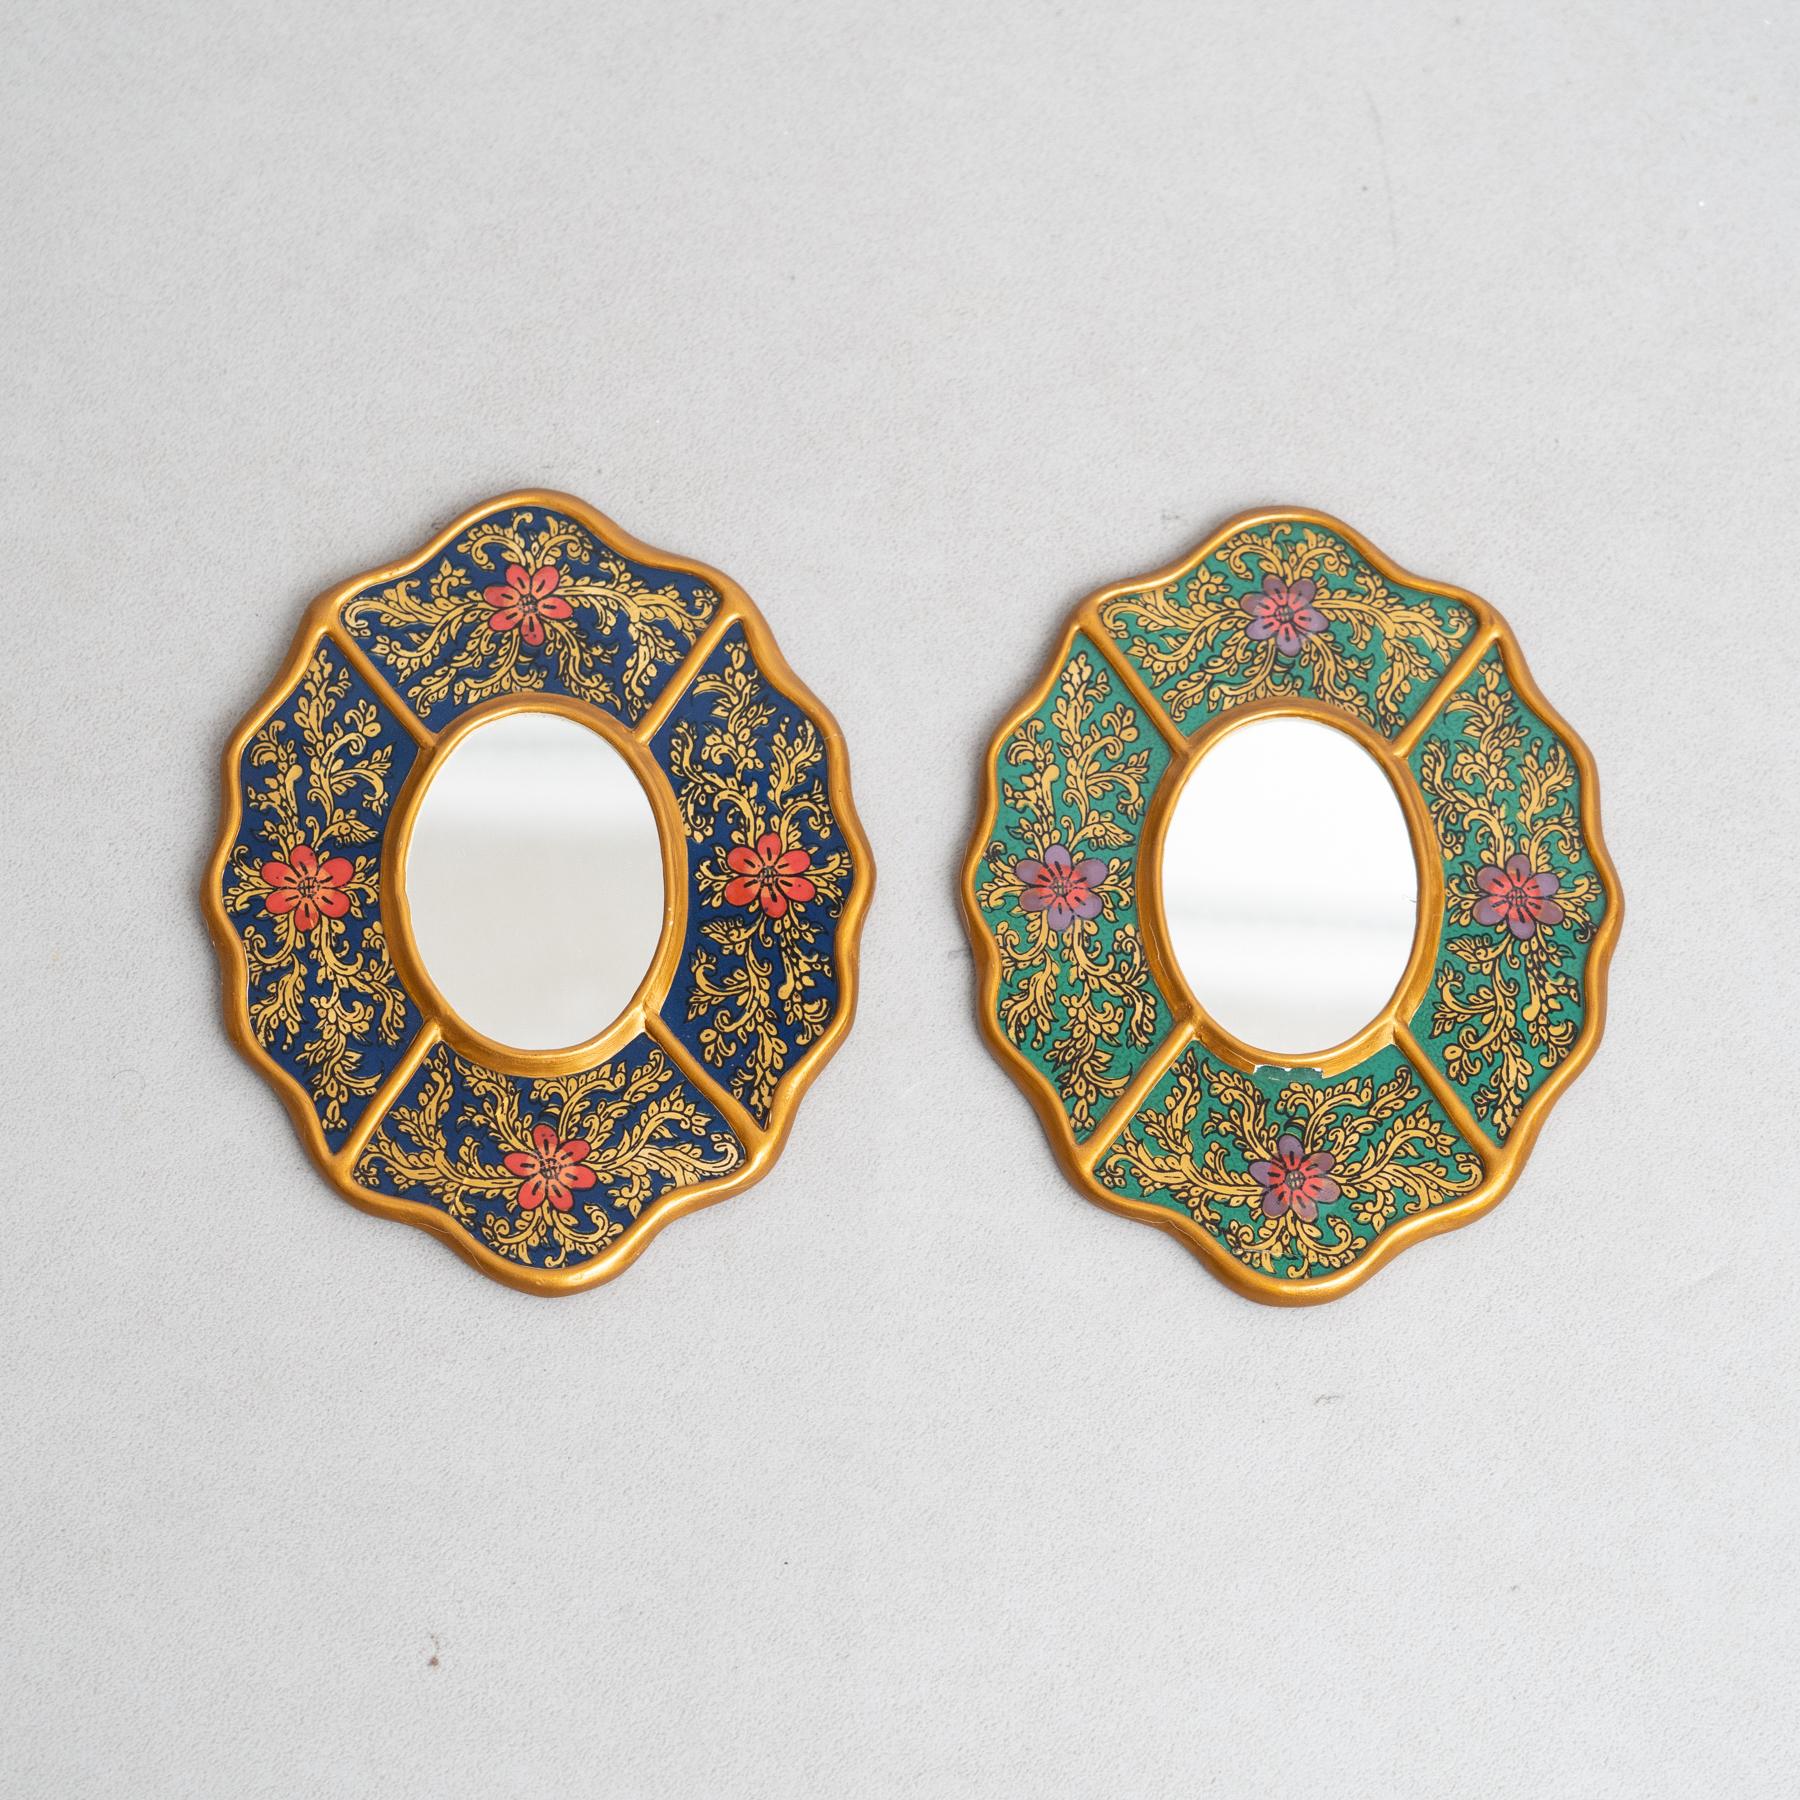 Set of Two Vintage Peruvian Mid-Century Hand-Painted Wooden Wall Mirrors.

Immerse yourself in the captivating charm of mid-century design with this remarkable collection of five hand-painted wooden wall mirrors, originating from 1960s Peru. Each